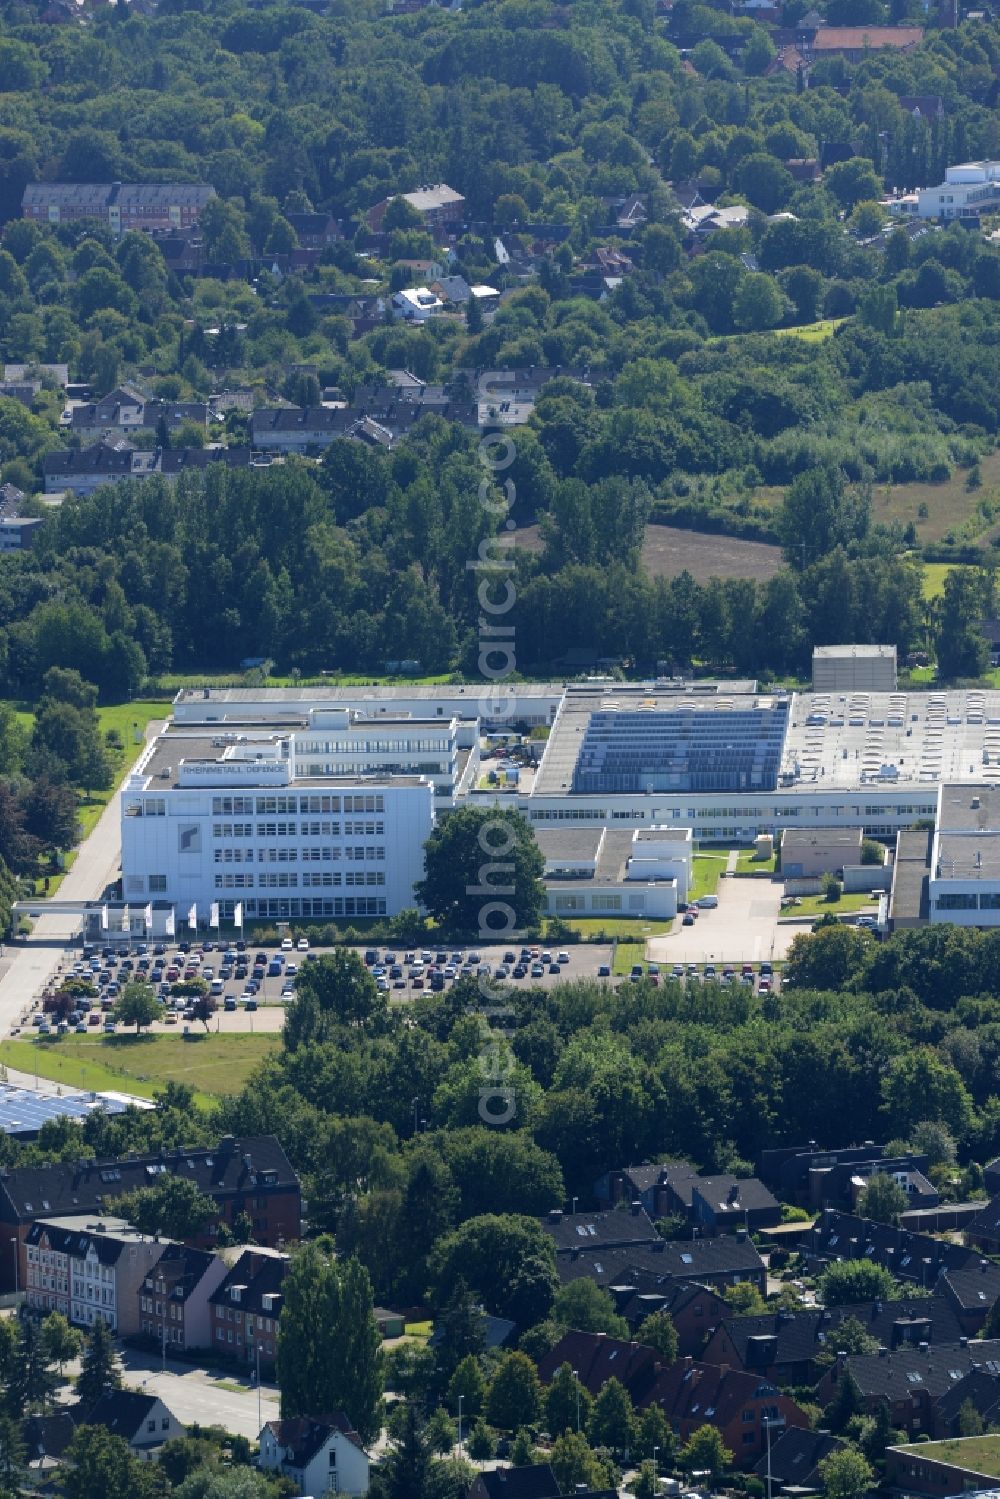 Aerial image Kiel - Company building complex of Rheinmetall Defecen in Kiel in the state of Schleswig-Holstein. The complex and compound includes facilities and departments of Rheinmetall Defence